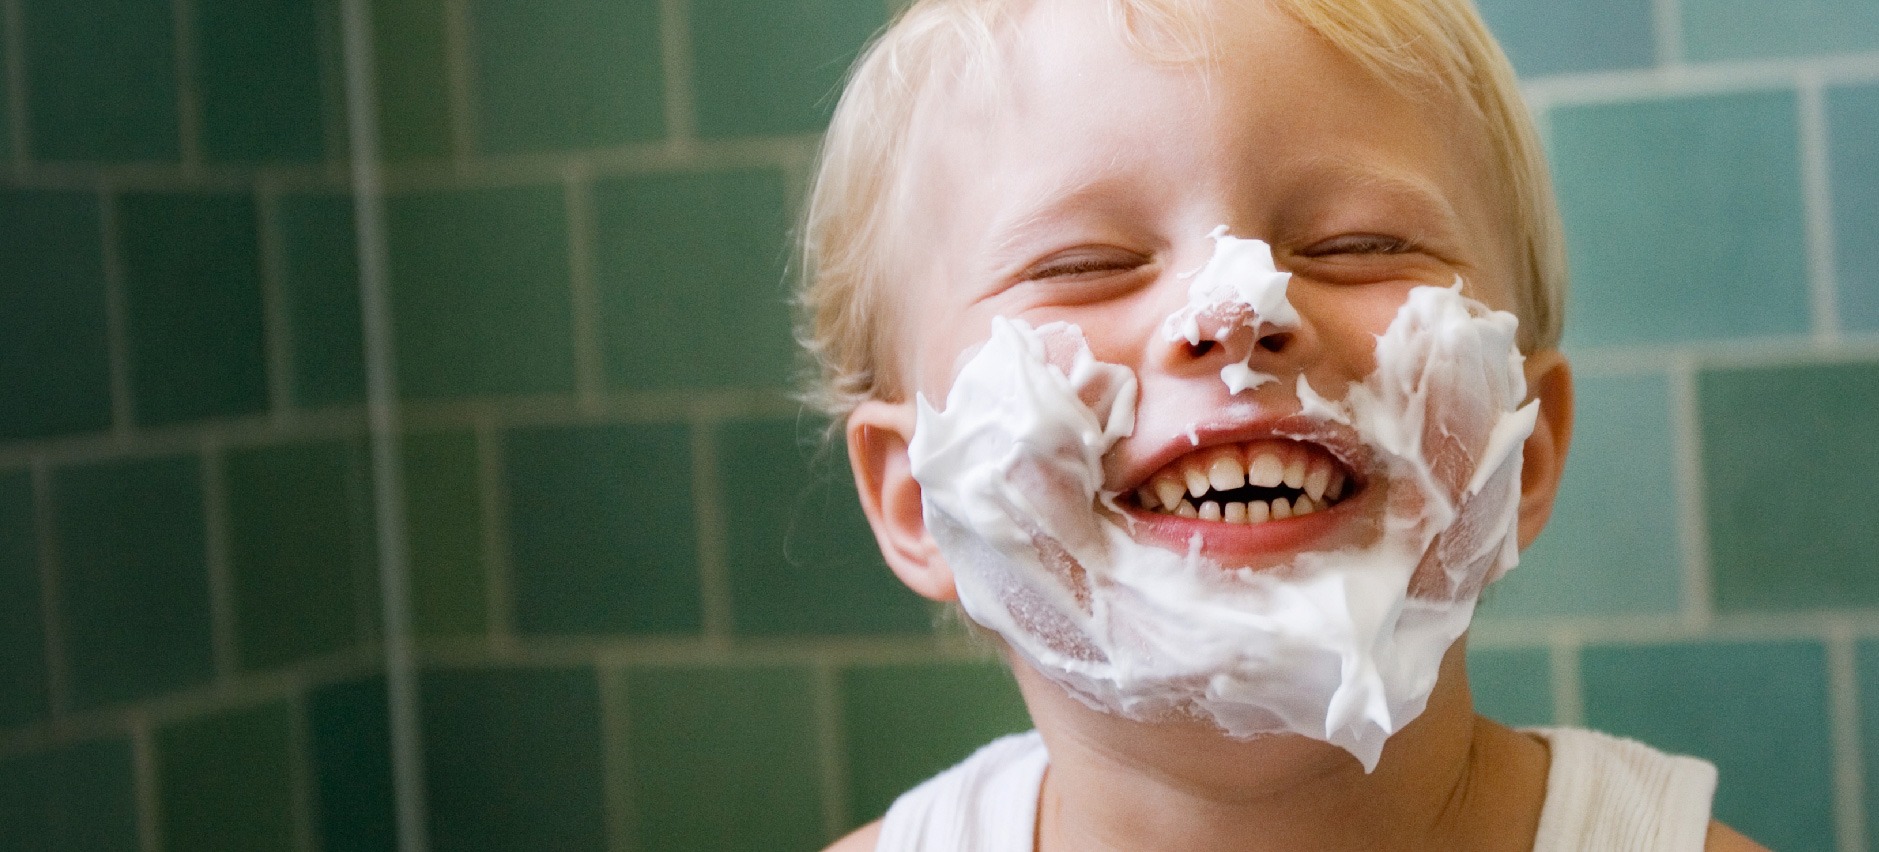 smiling toddler boy with shaving cream on face